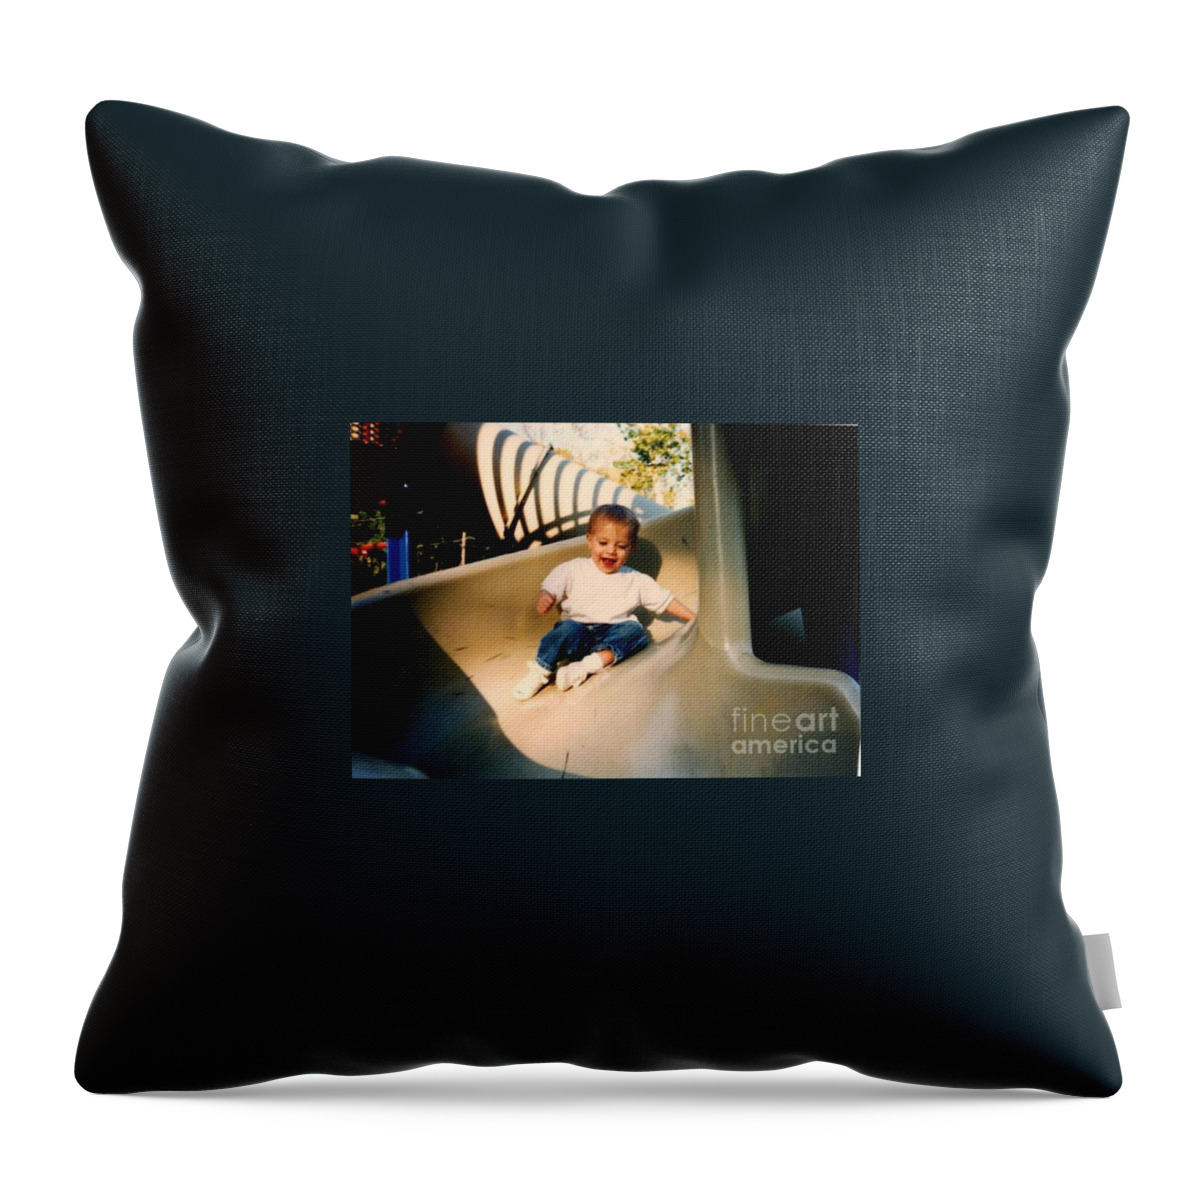  Throw Pillow featuring the photograph Weeeee by Kelly Awad